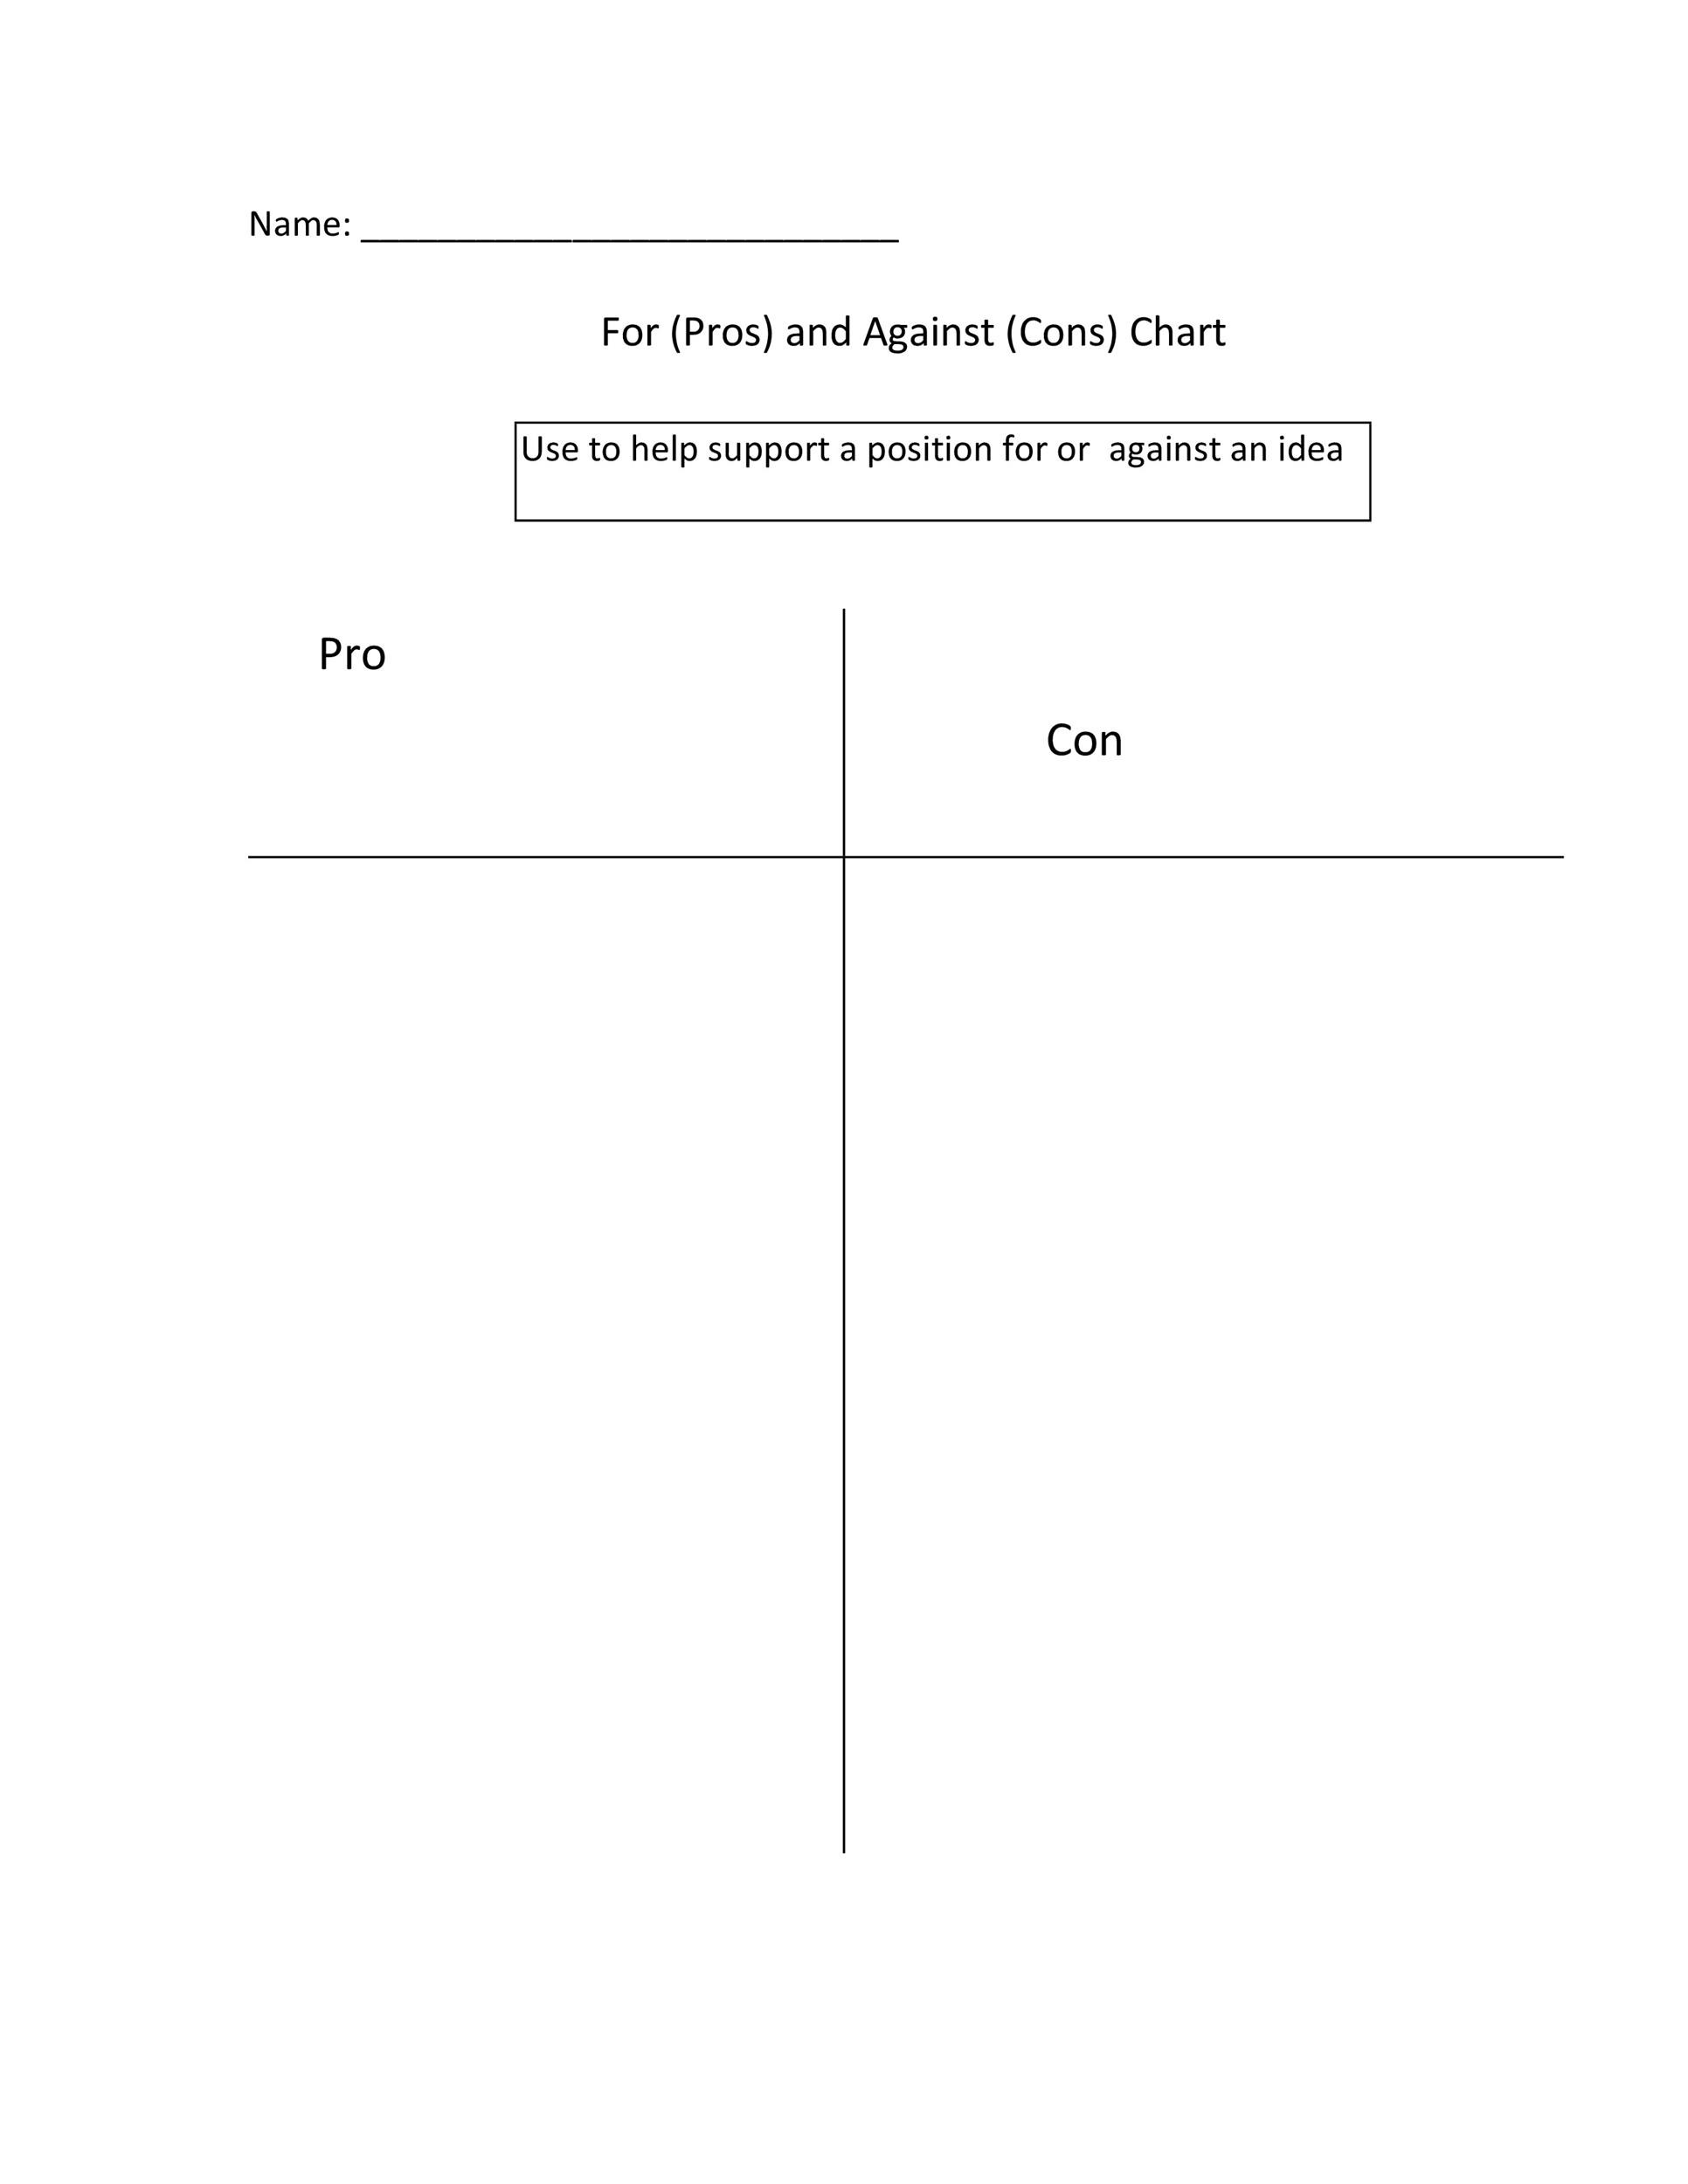 Pros And Cons T Chart